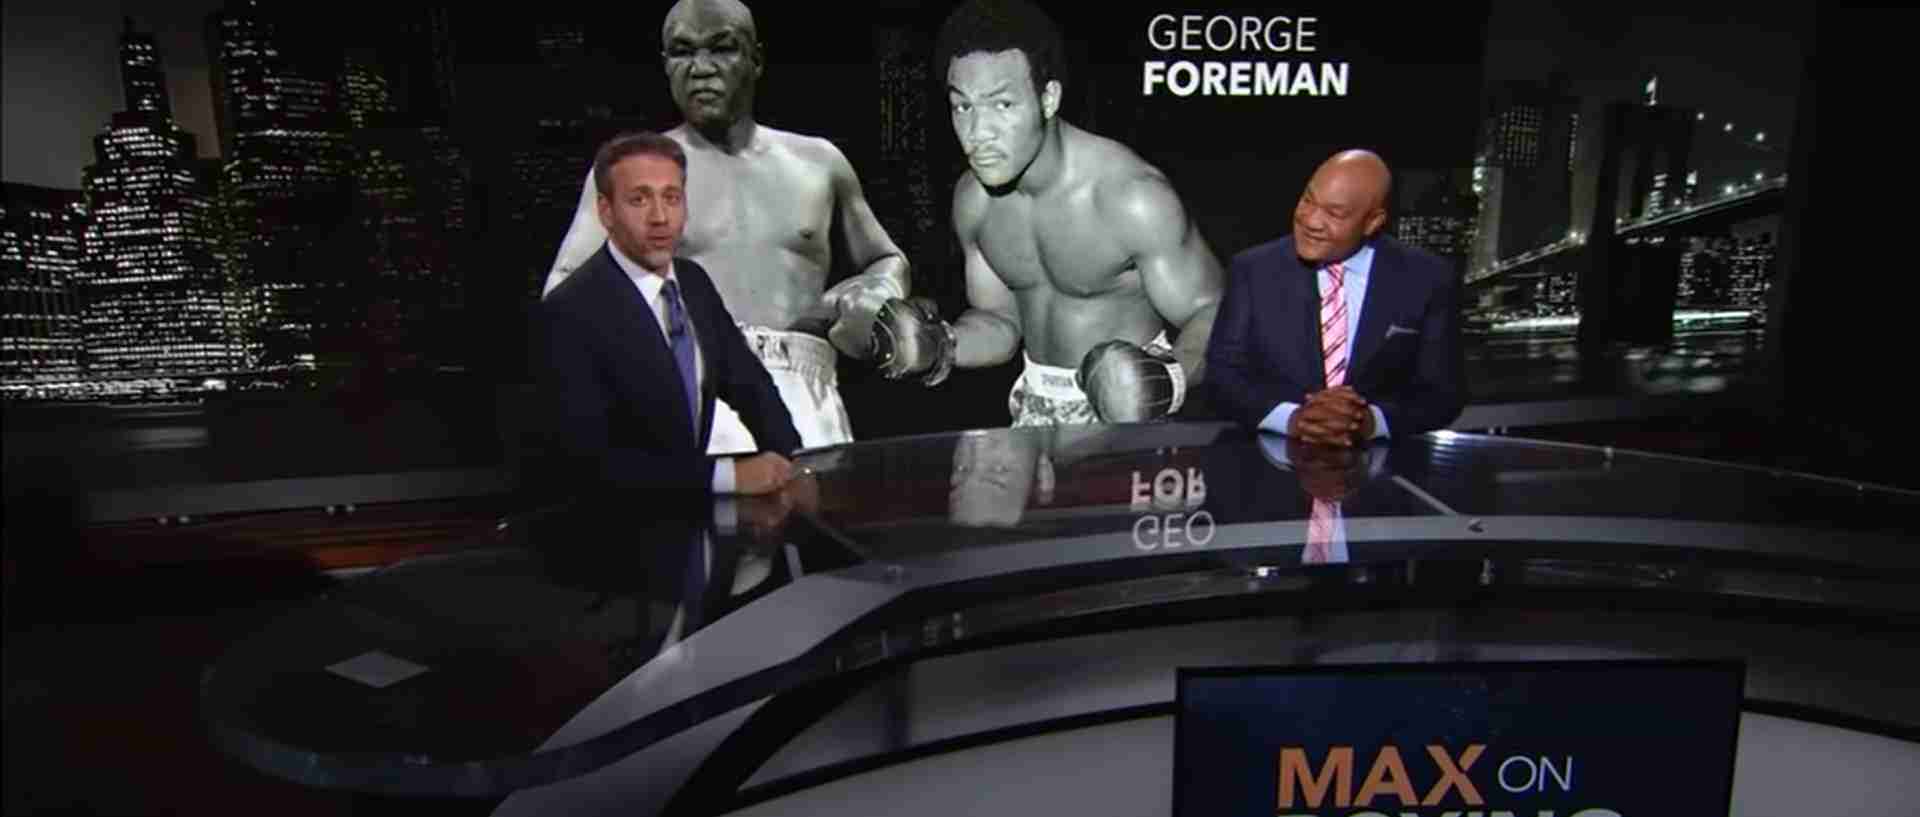 George Foreman Reveals Hardest Puncher He Faced